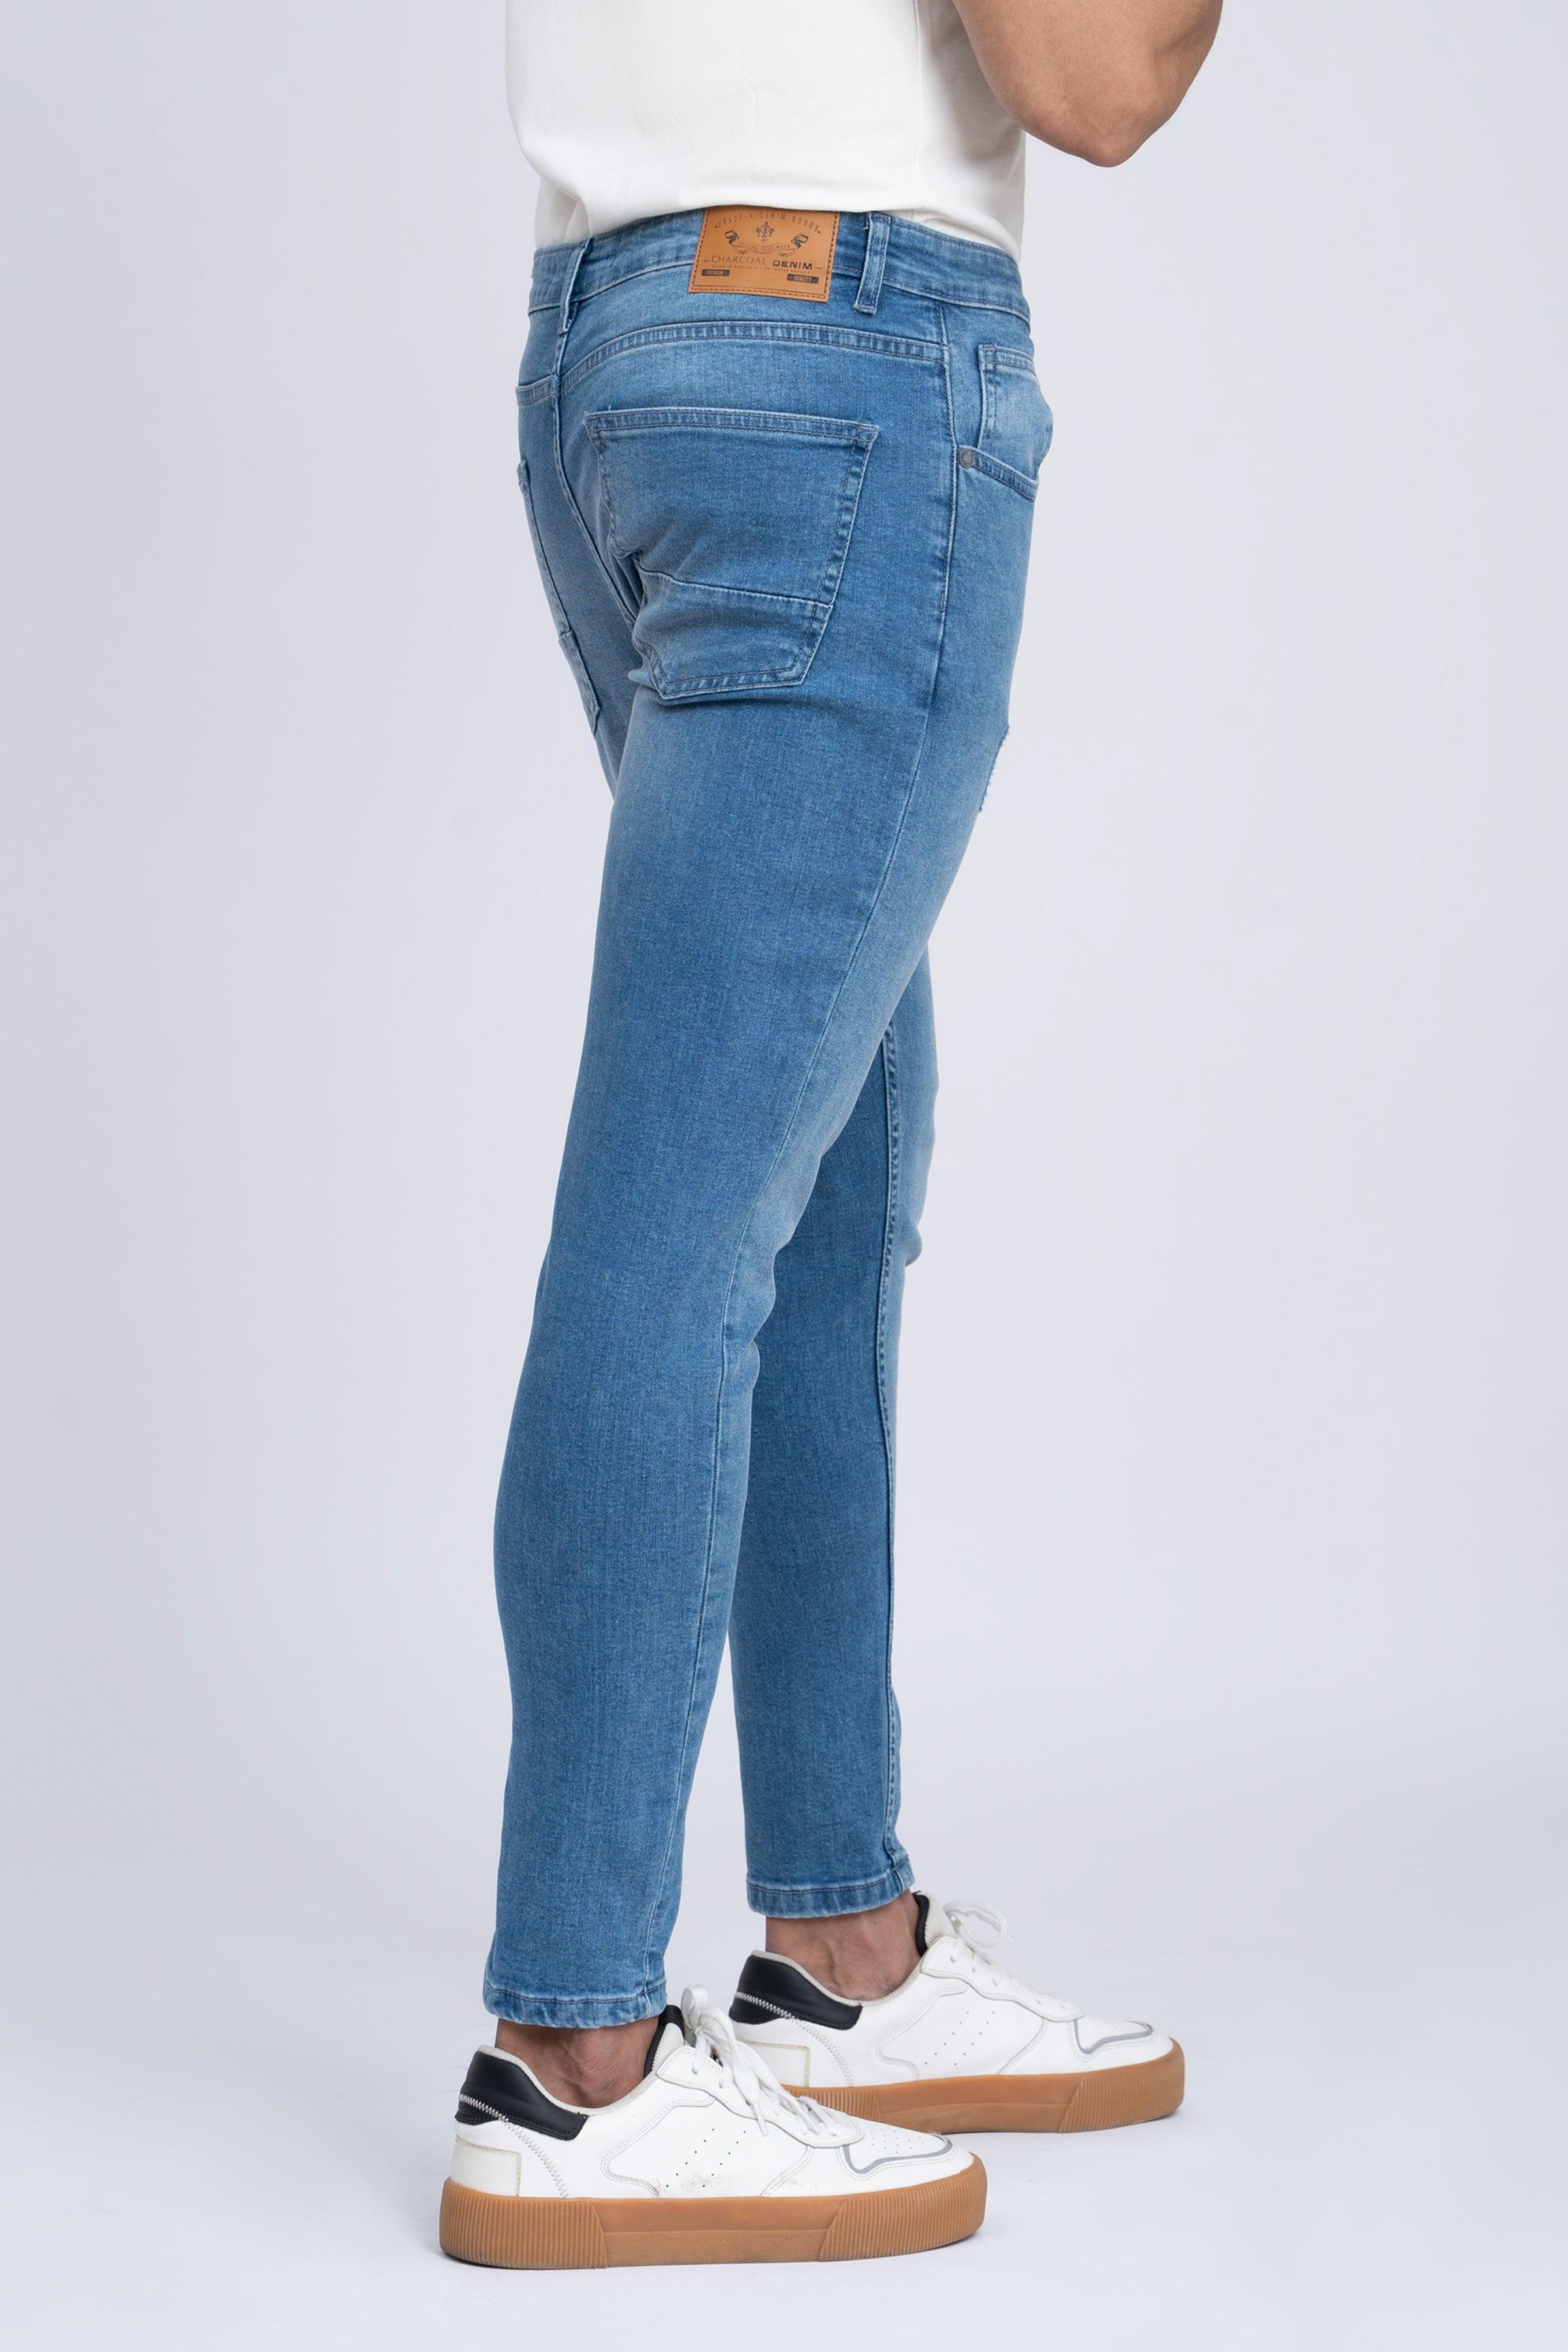 JEAN SKINYY LEG LIGHT BLUE at Charcoal Clothing